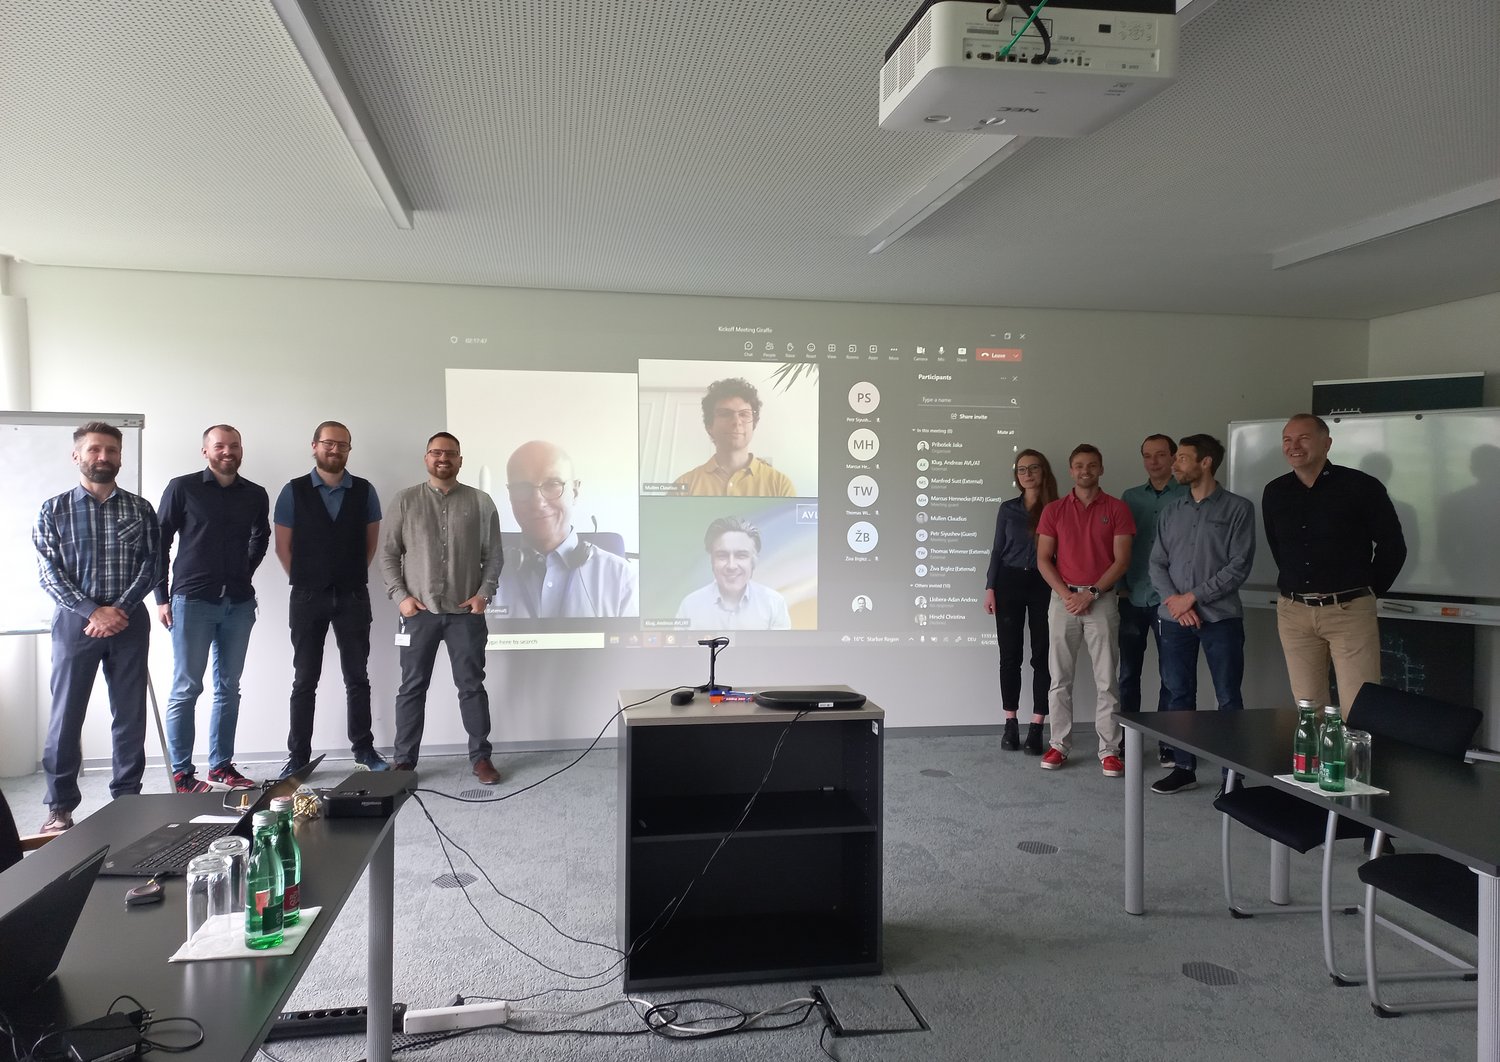 group picture at the kick-off, 9 people standing in front of a screen where you can see more people taking part online